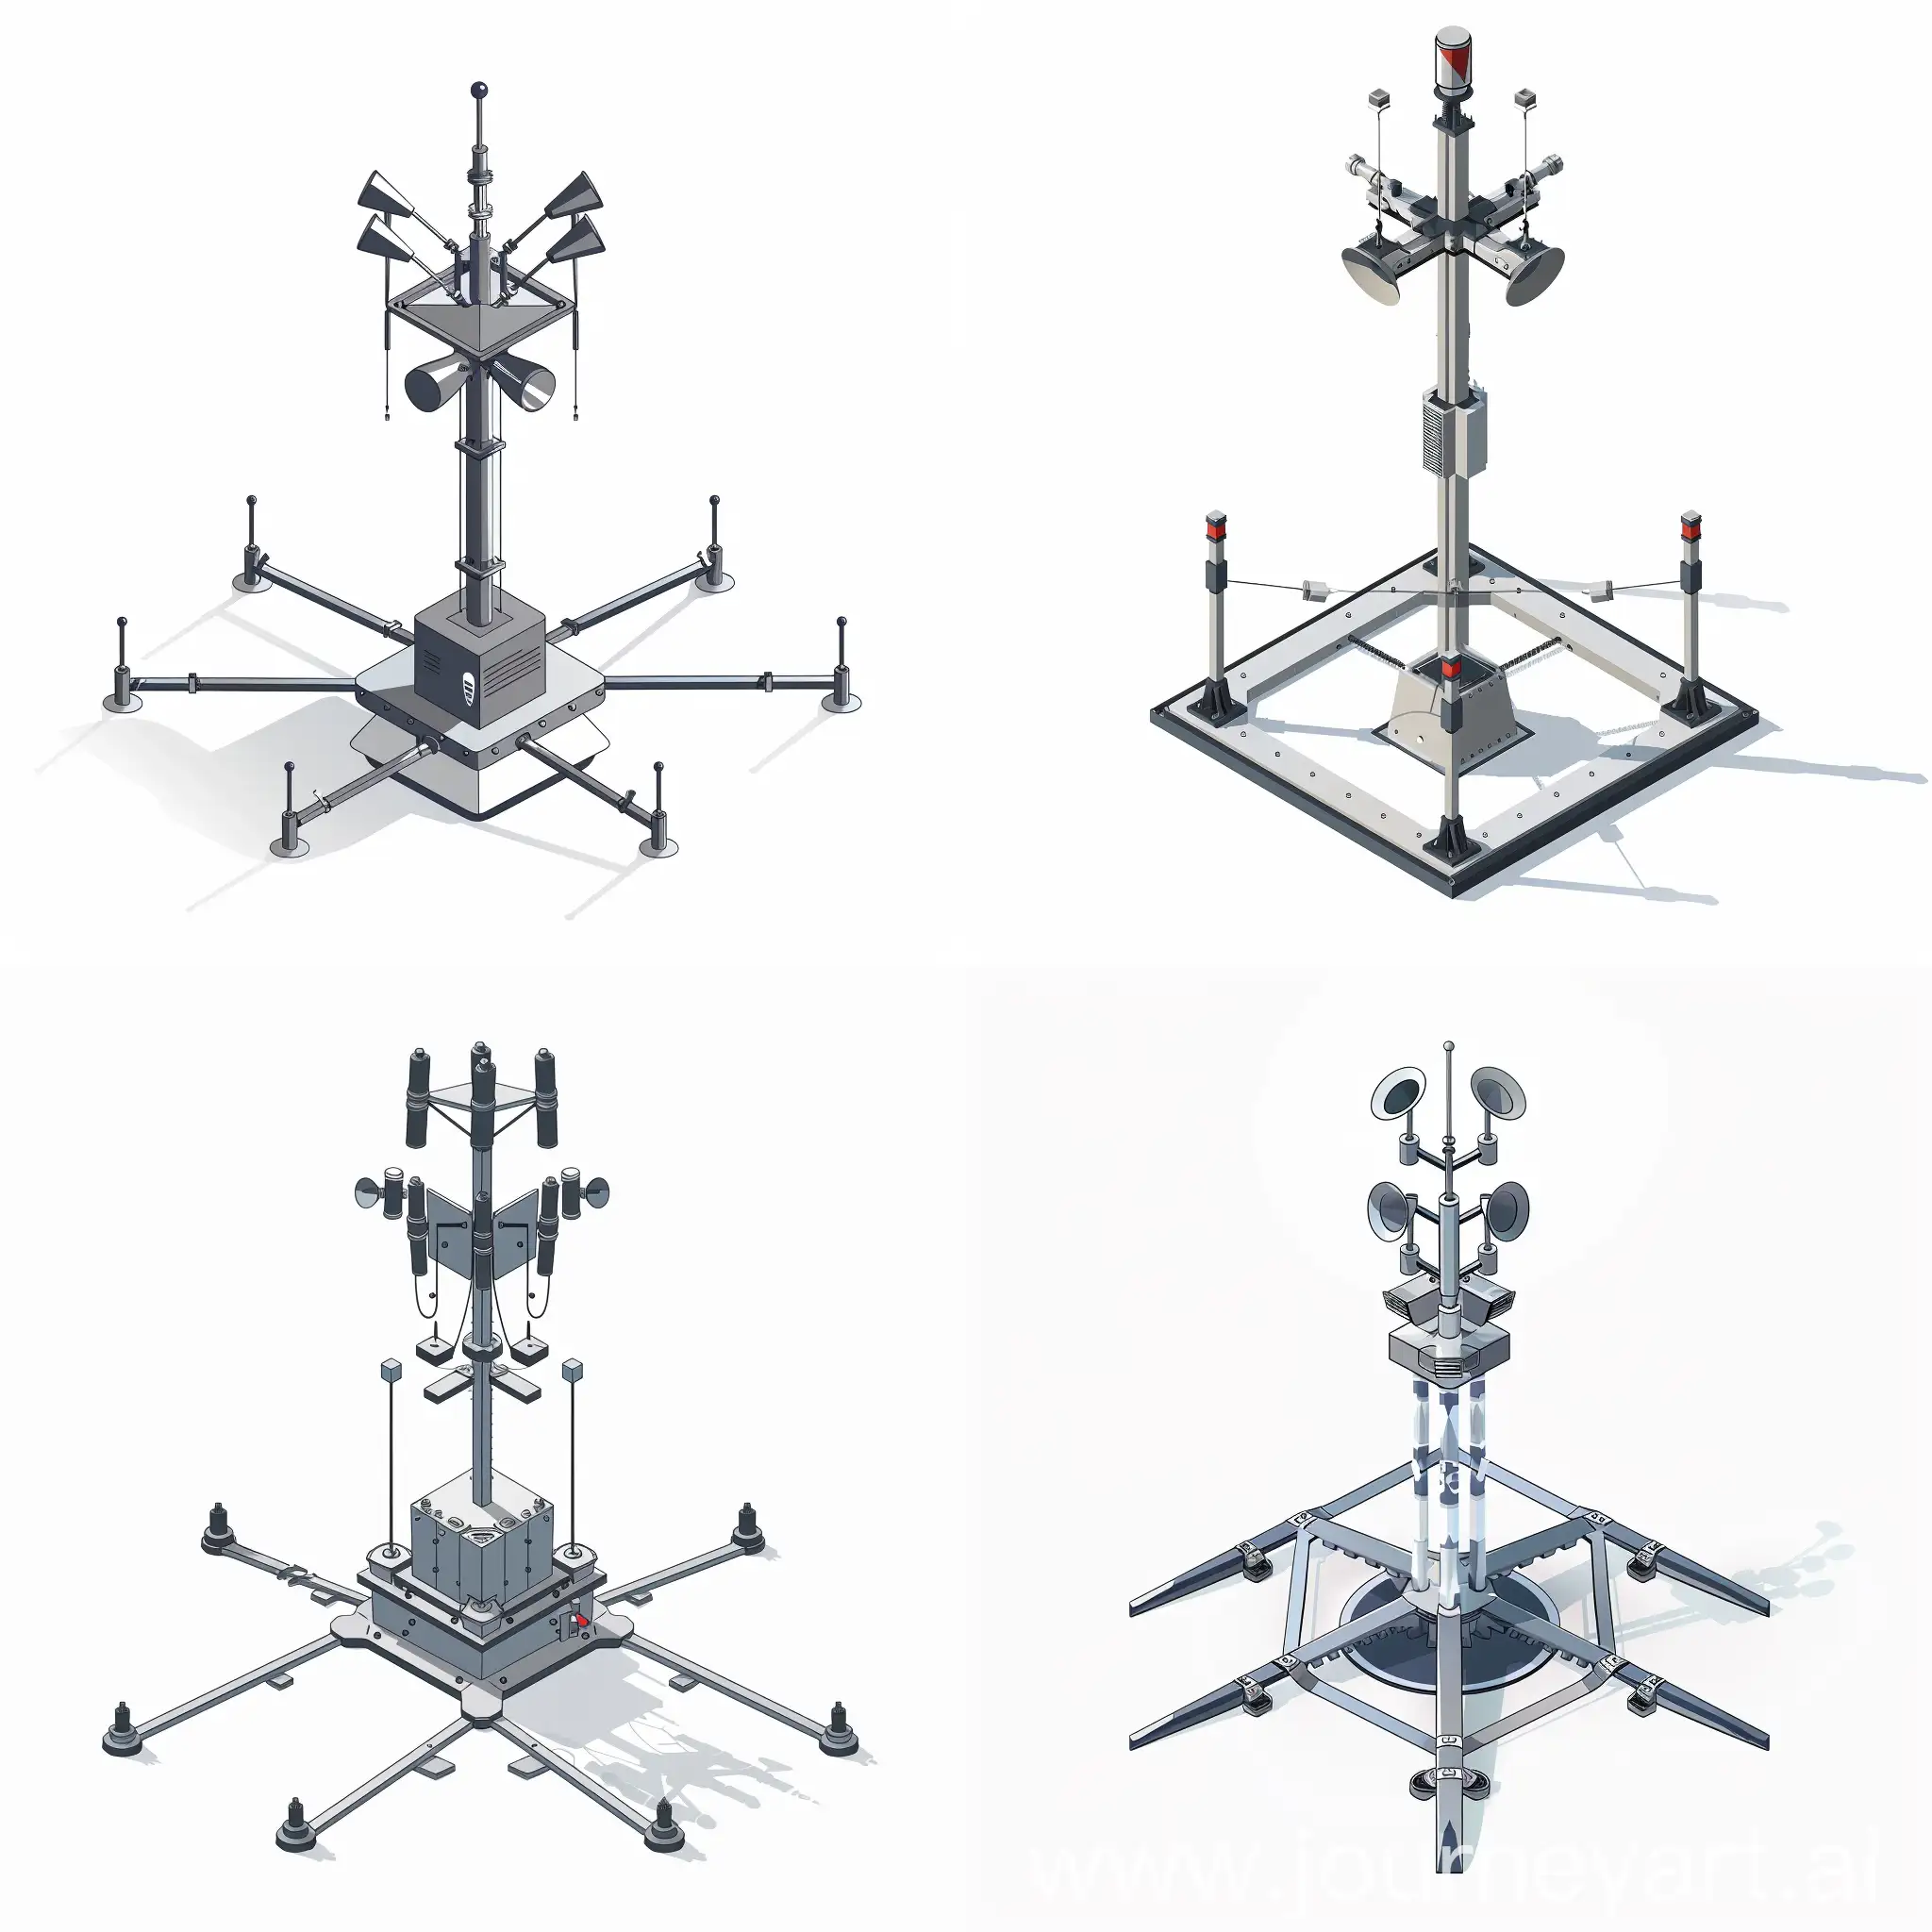 small minimalist simple metallic structure and six metallic arms around the structure for ground support with a one pole structure in the center like a mast with a vertical arrangement of sirens horns facing the same direction on the top of the pole, with a vshape front for hauling, simple illustration, extremely low detailed, stencil for Visio, isometric, white background, warning alert, icon type, industrial structure, no futuristic
